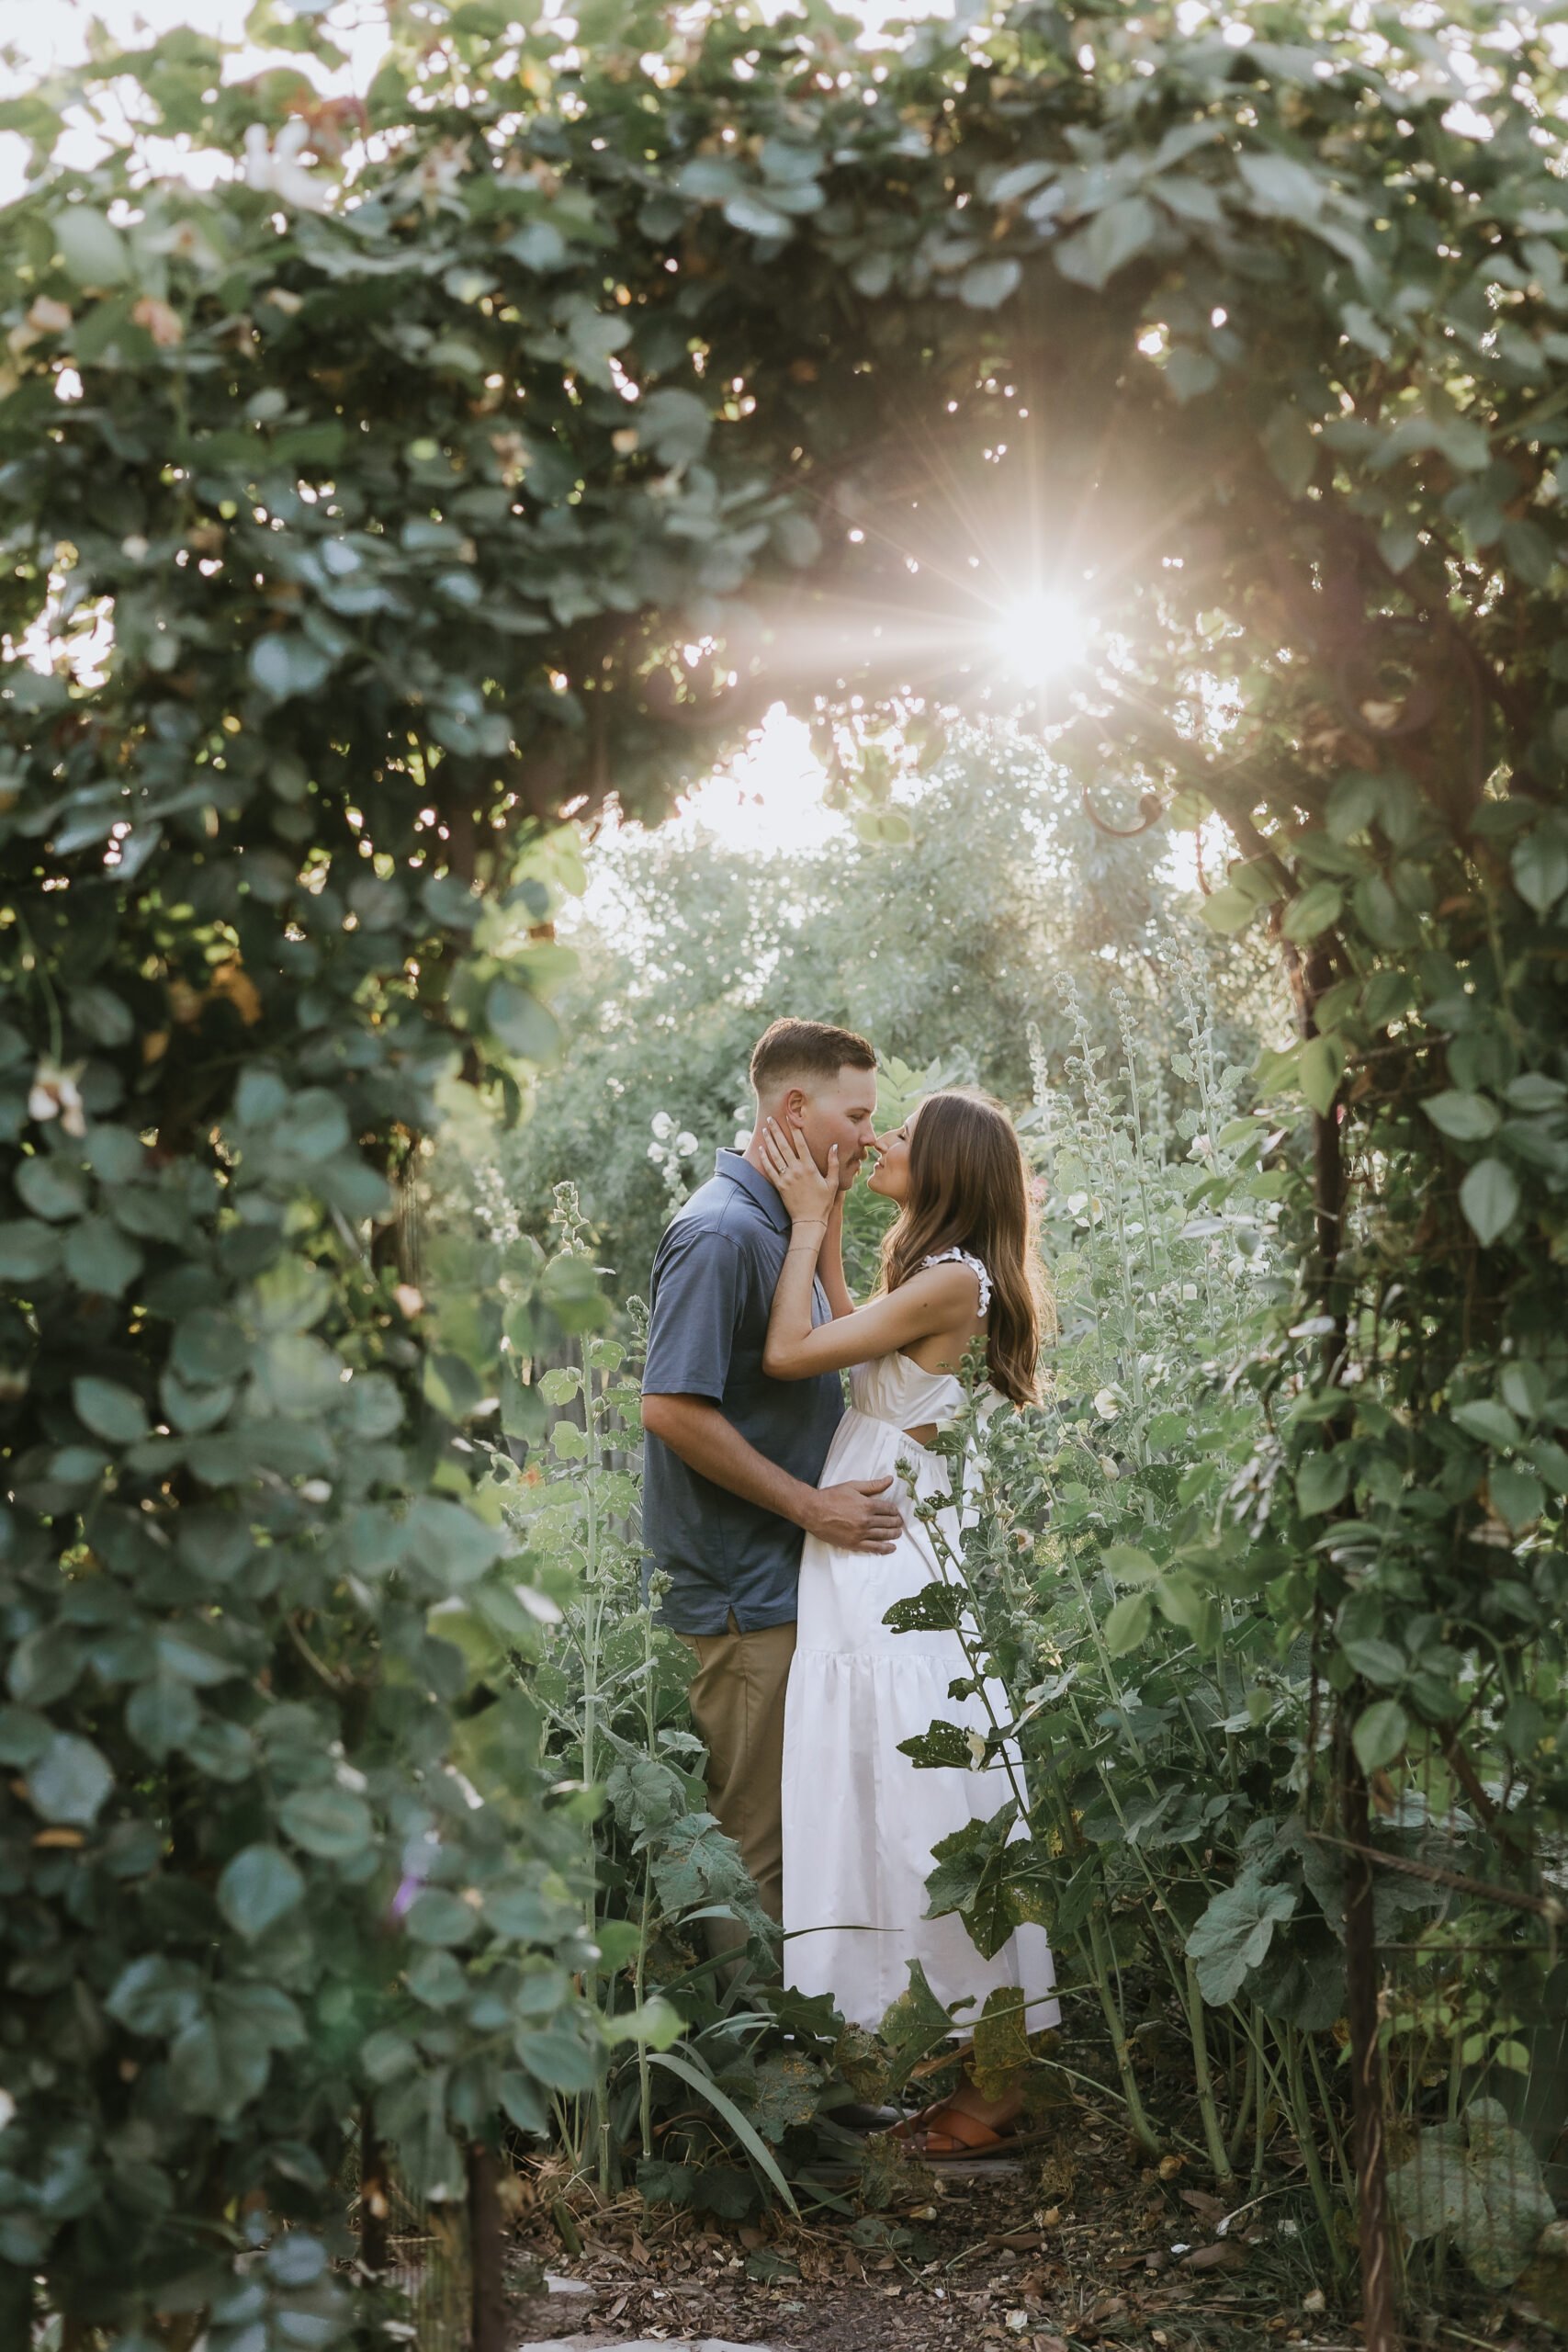 Garden engagement session at kruppa farms and garden in winton california